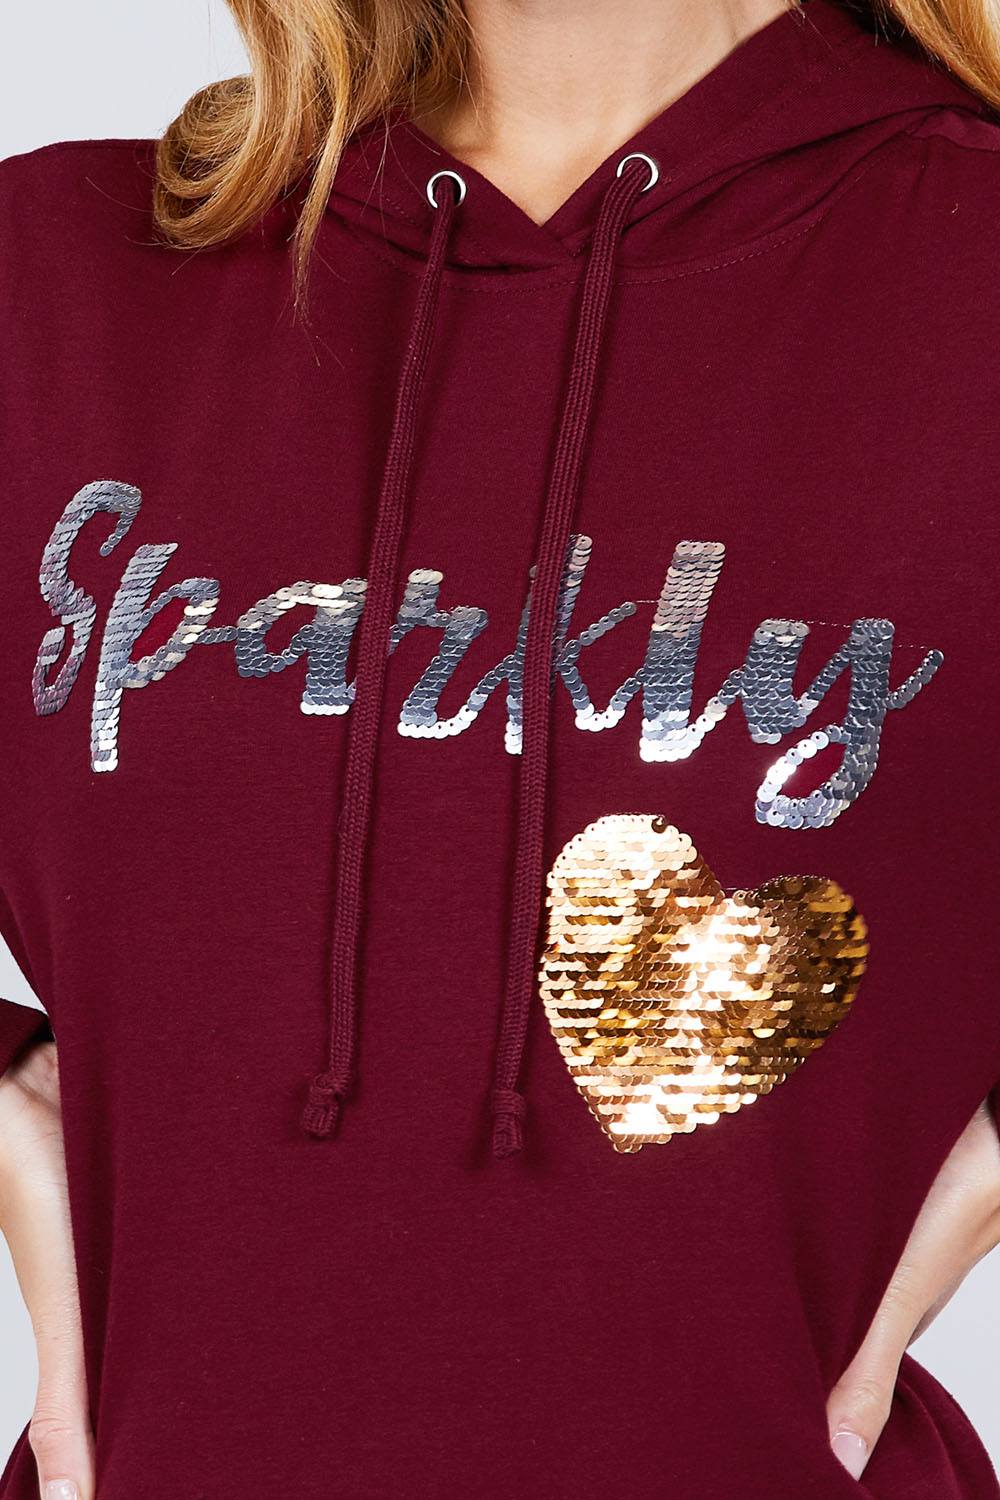 Sparkly Sequins Hoodie Pullover Sparkly Sequins Hoodie Pullover - M&R CORNER M&R CORNER